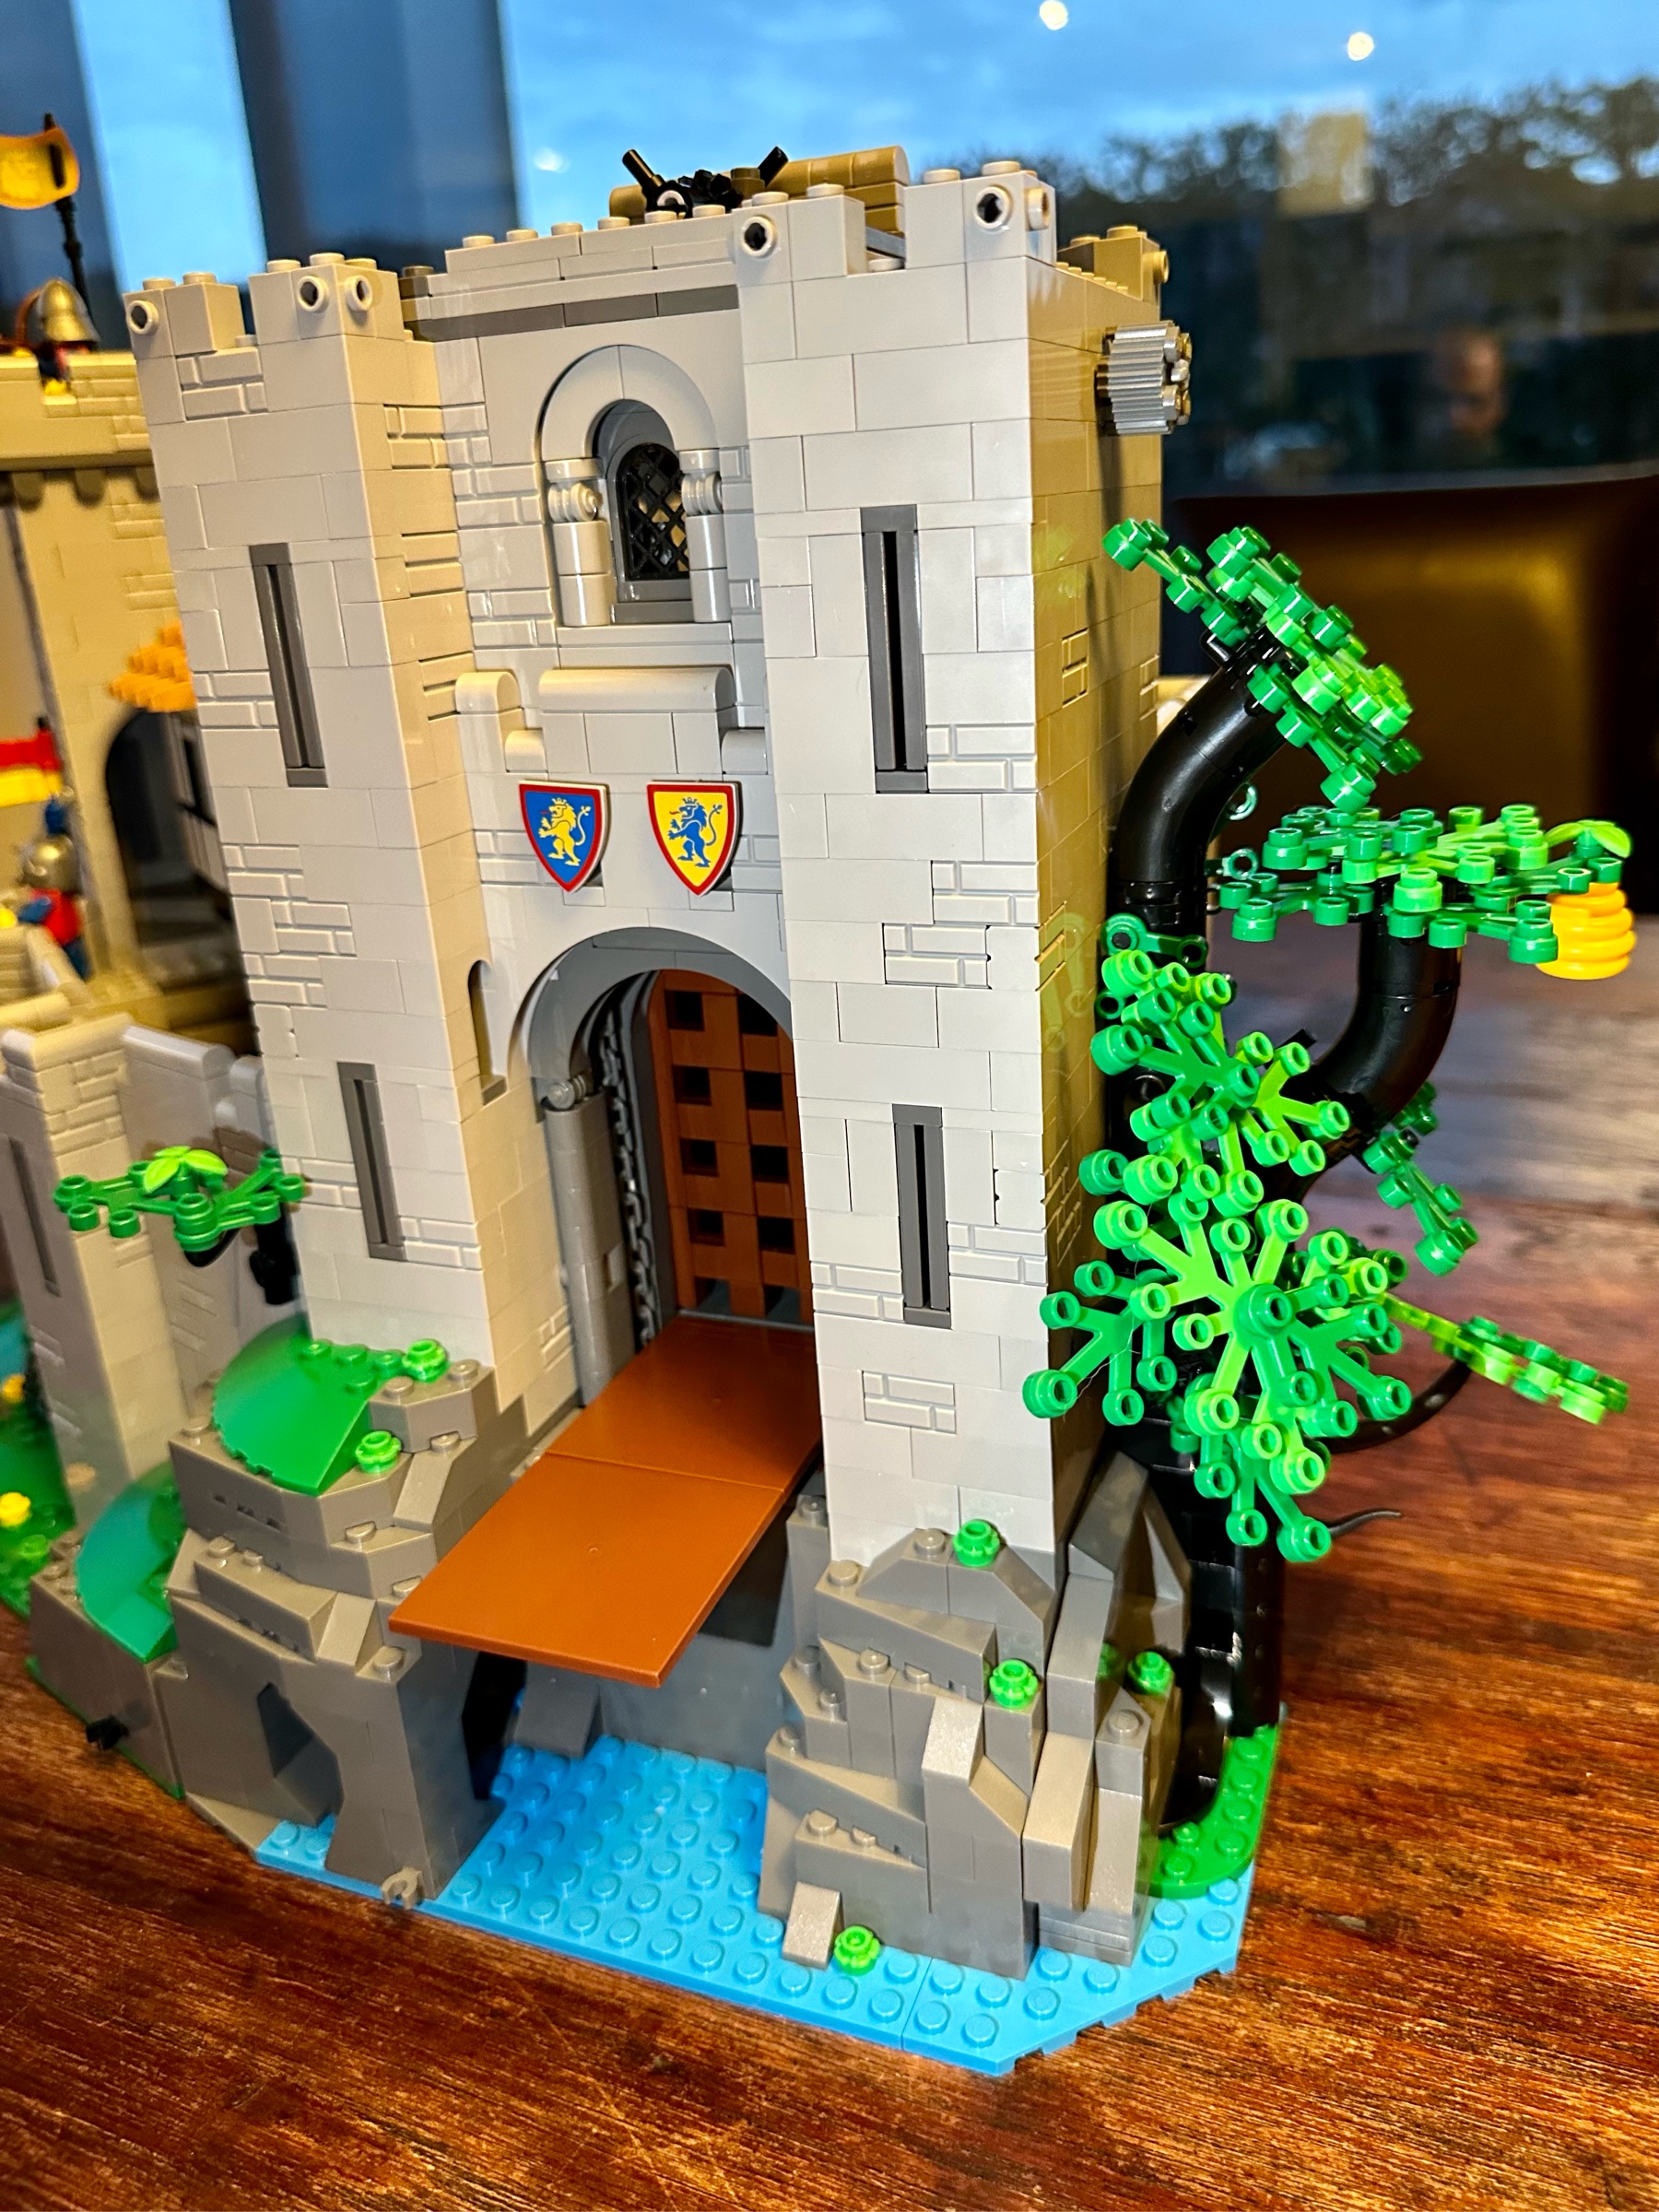 Exterior view of LEGO castle with drawbridge lowered revealing a closed portcullis behind it. A tree on the right side had lush green foliage and a yellow beehive.